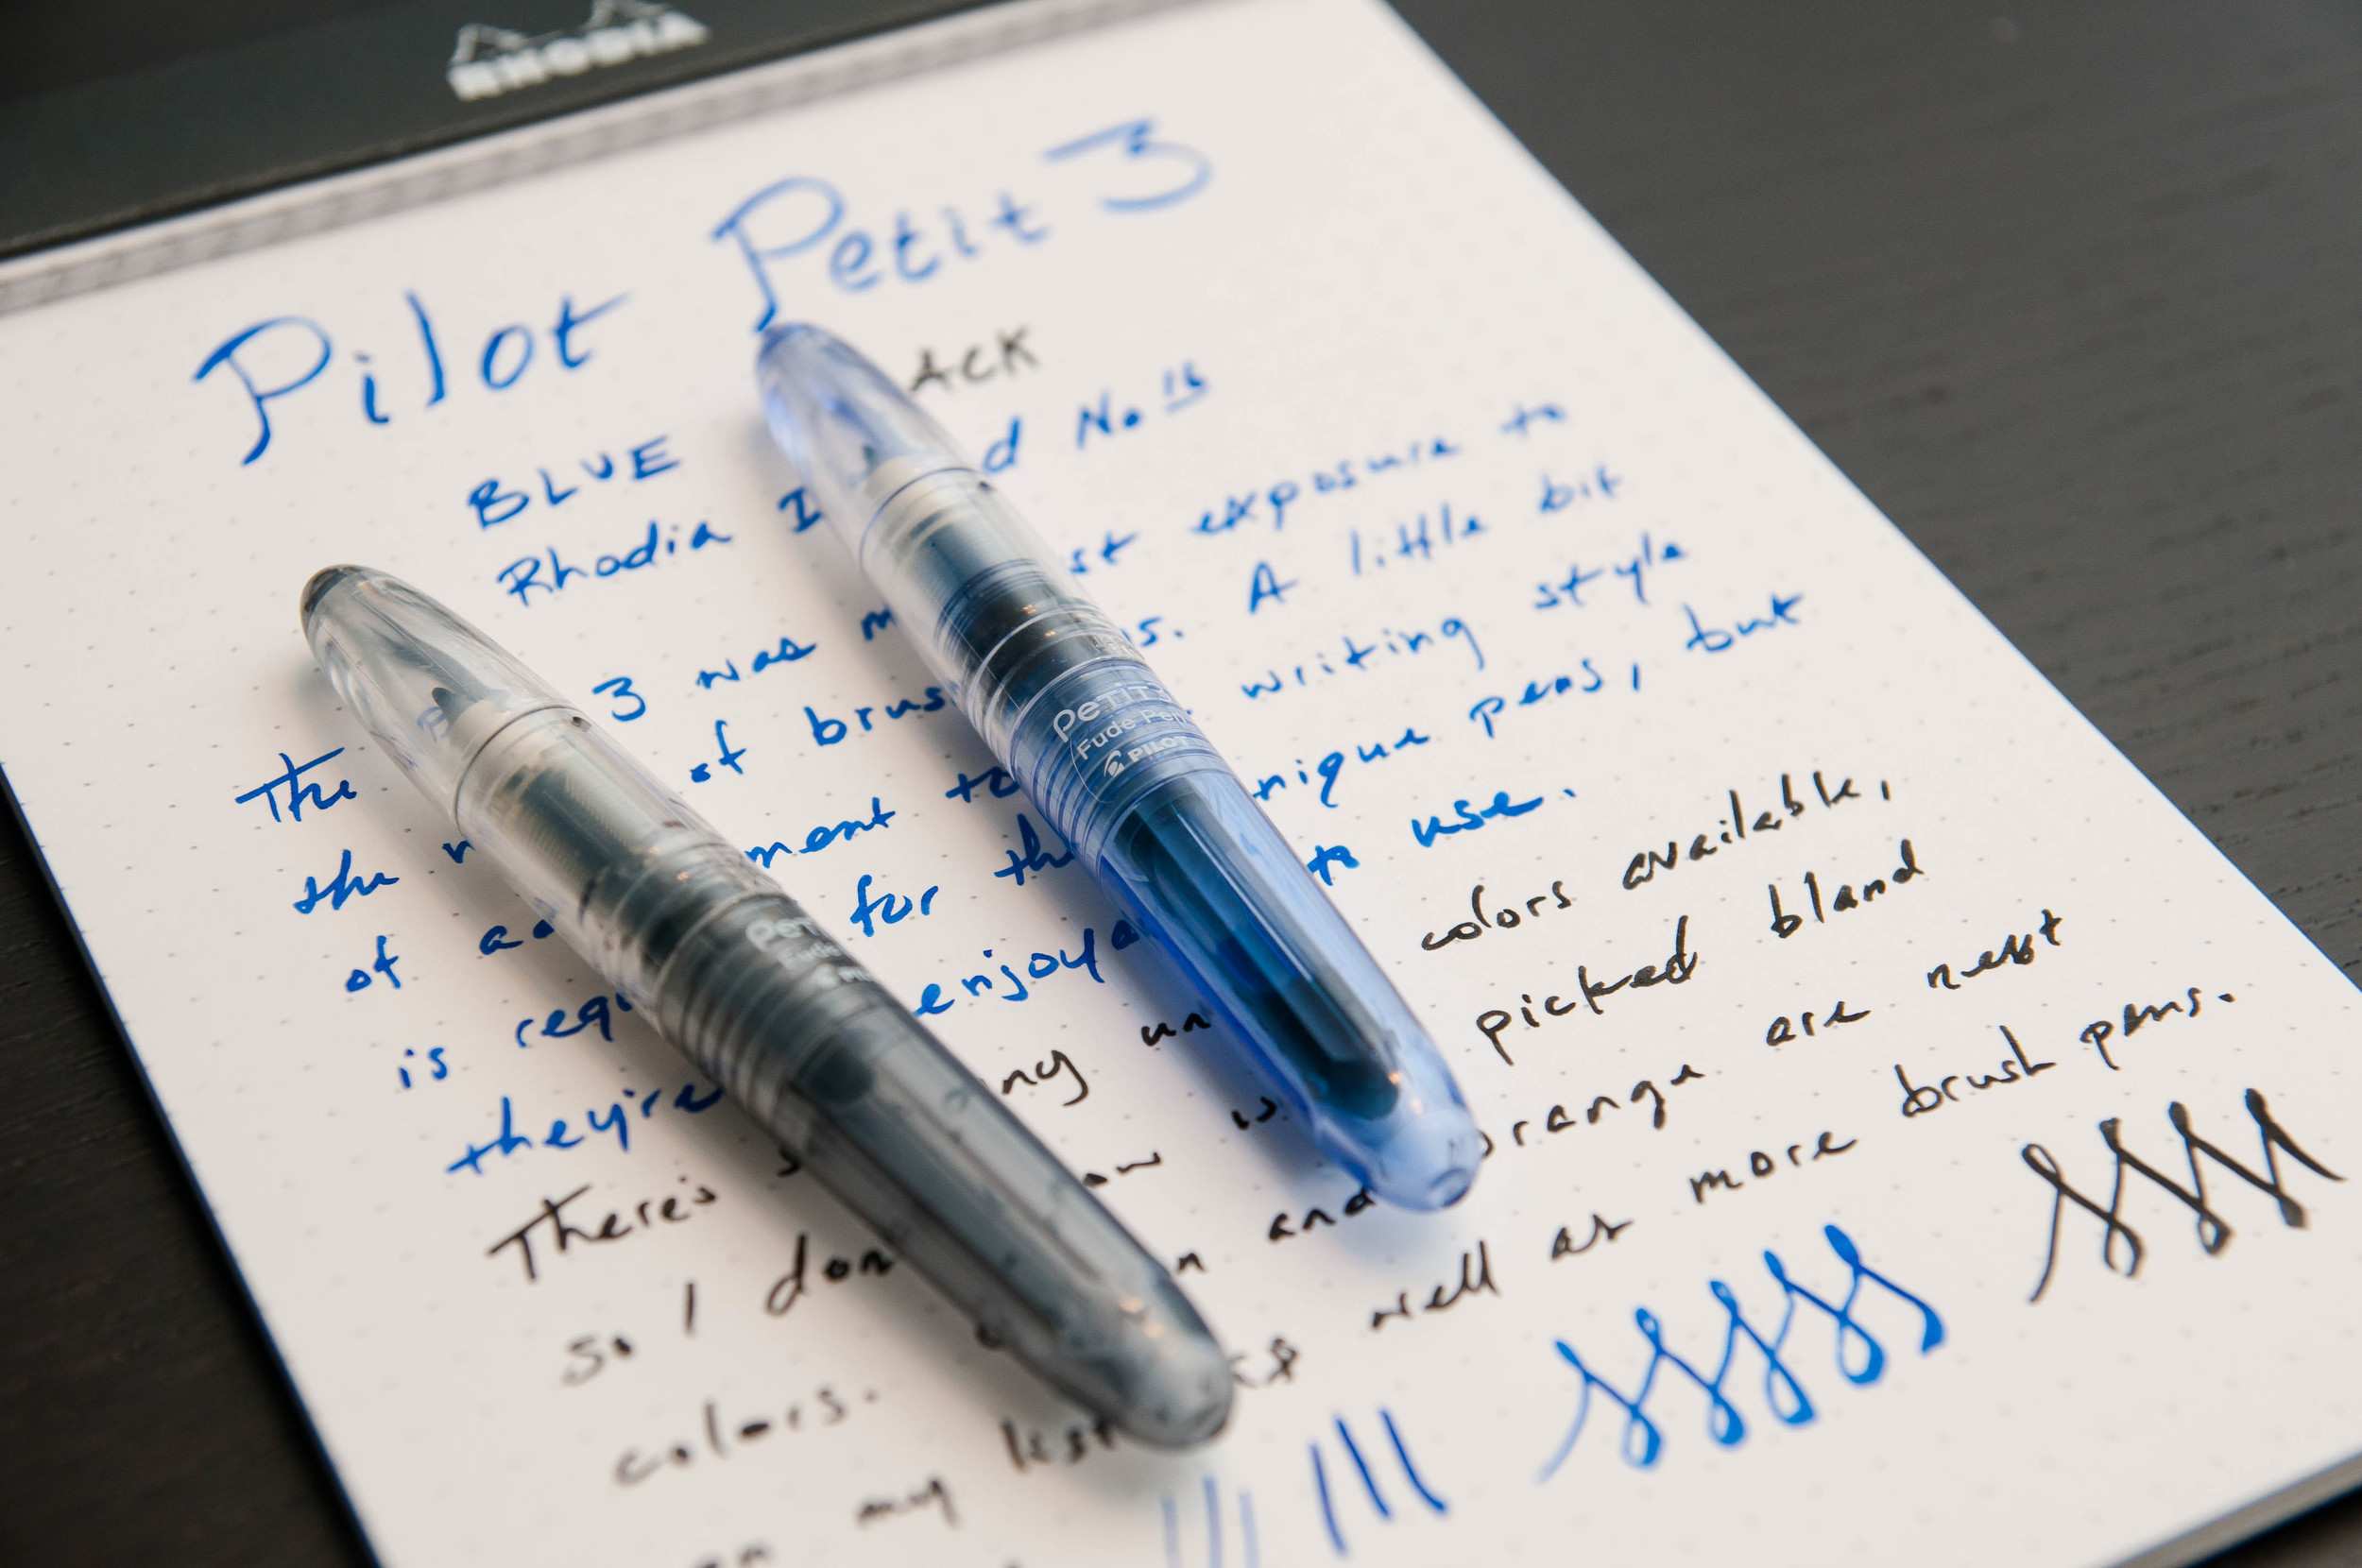 How To Use Your Fountain Pens More Often: Sketch and Doodle